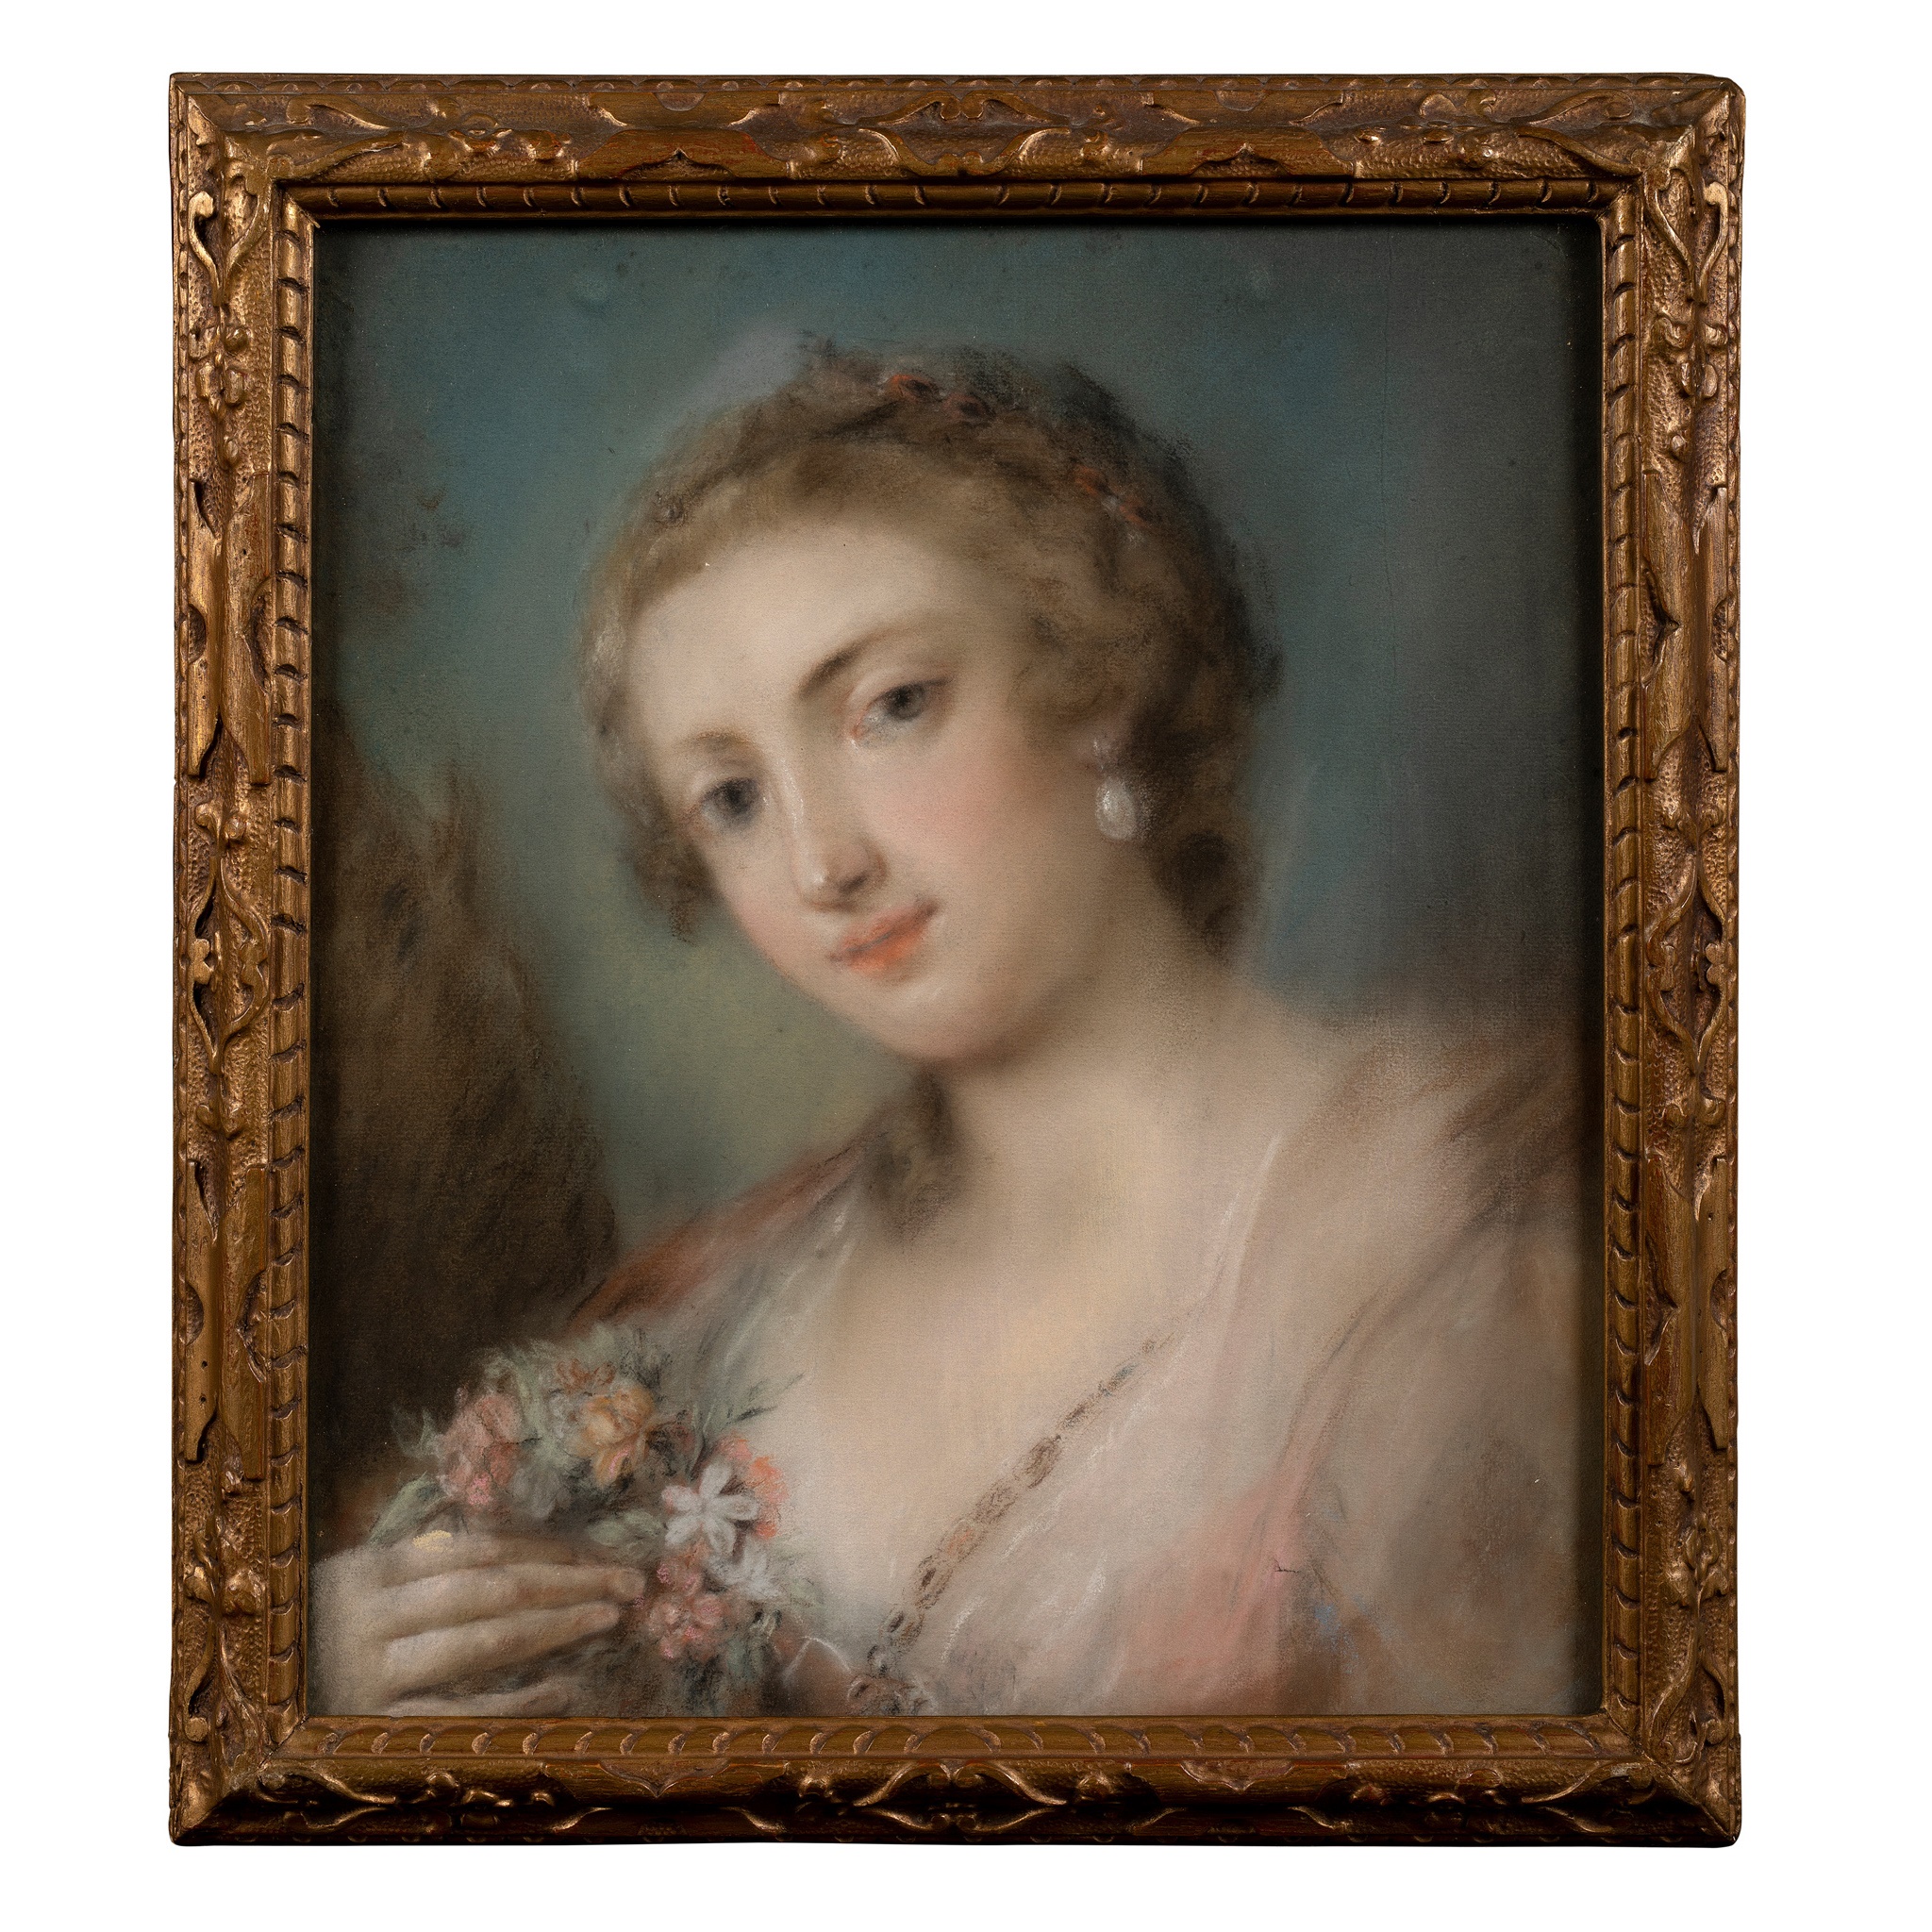 CIRCLE OF ROSALBA CARRIERA (VENETIAN 1673-1757) PORTRAIT OF A LADY WITH FLOWERS - Image 2 of 2